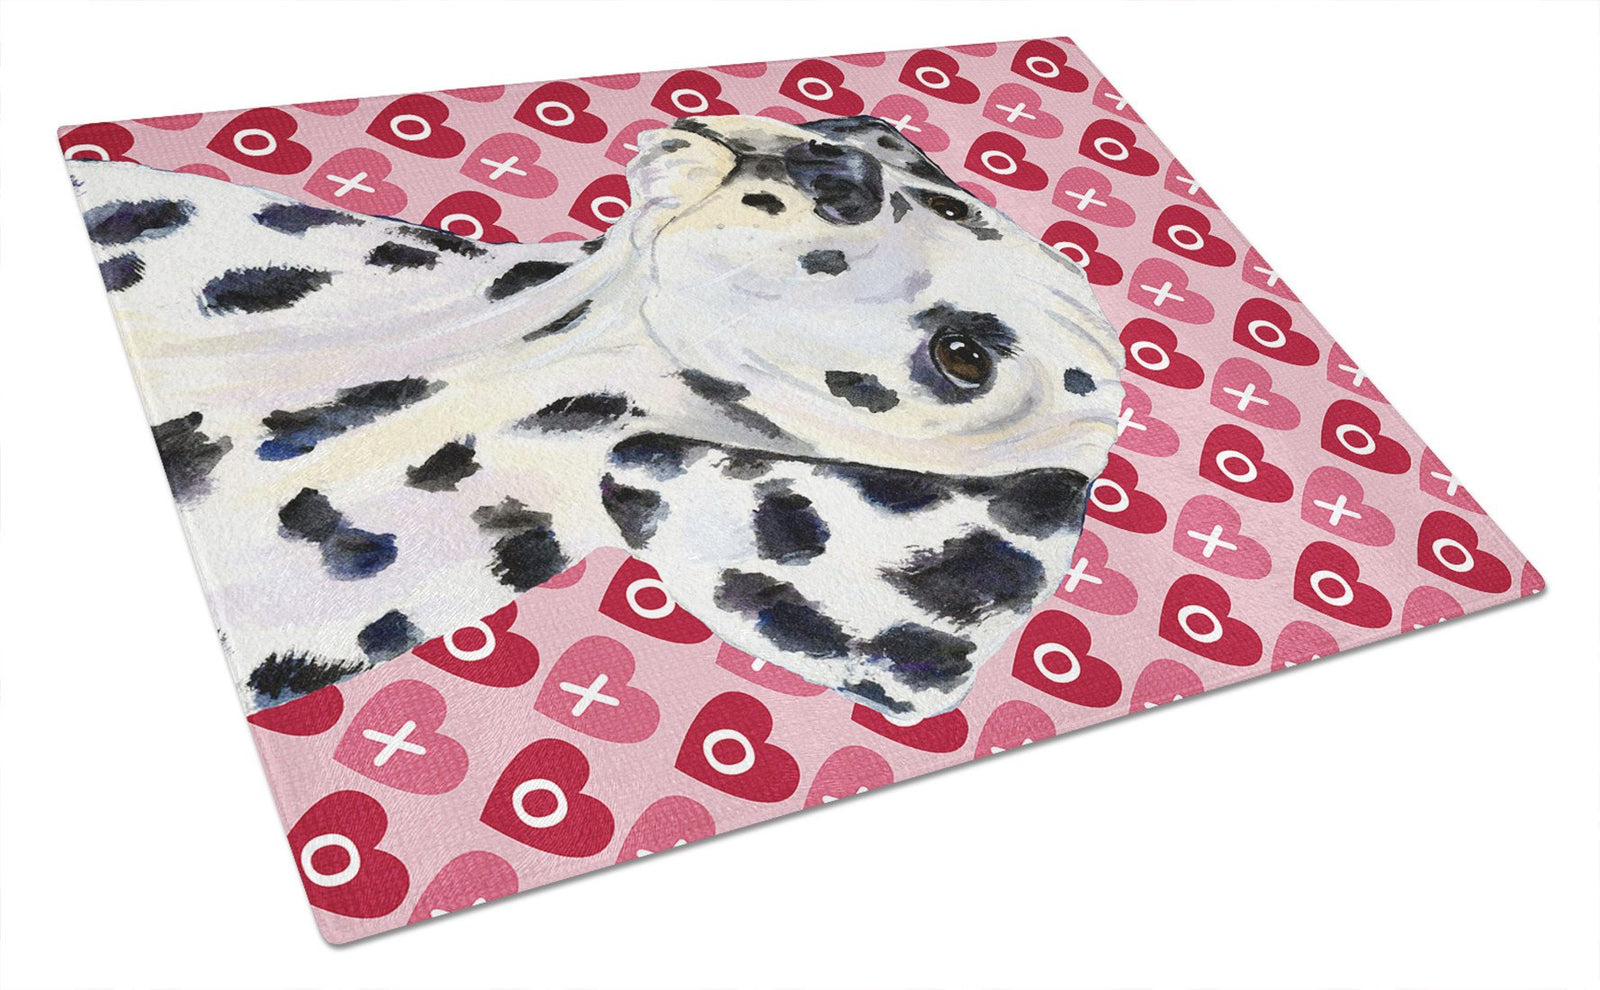 Dalmatian Hearts Love and Valentine's Day Portrait Glass Cutting Board Large by Caroline's Treasures